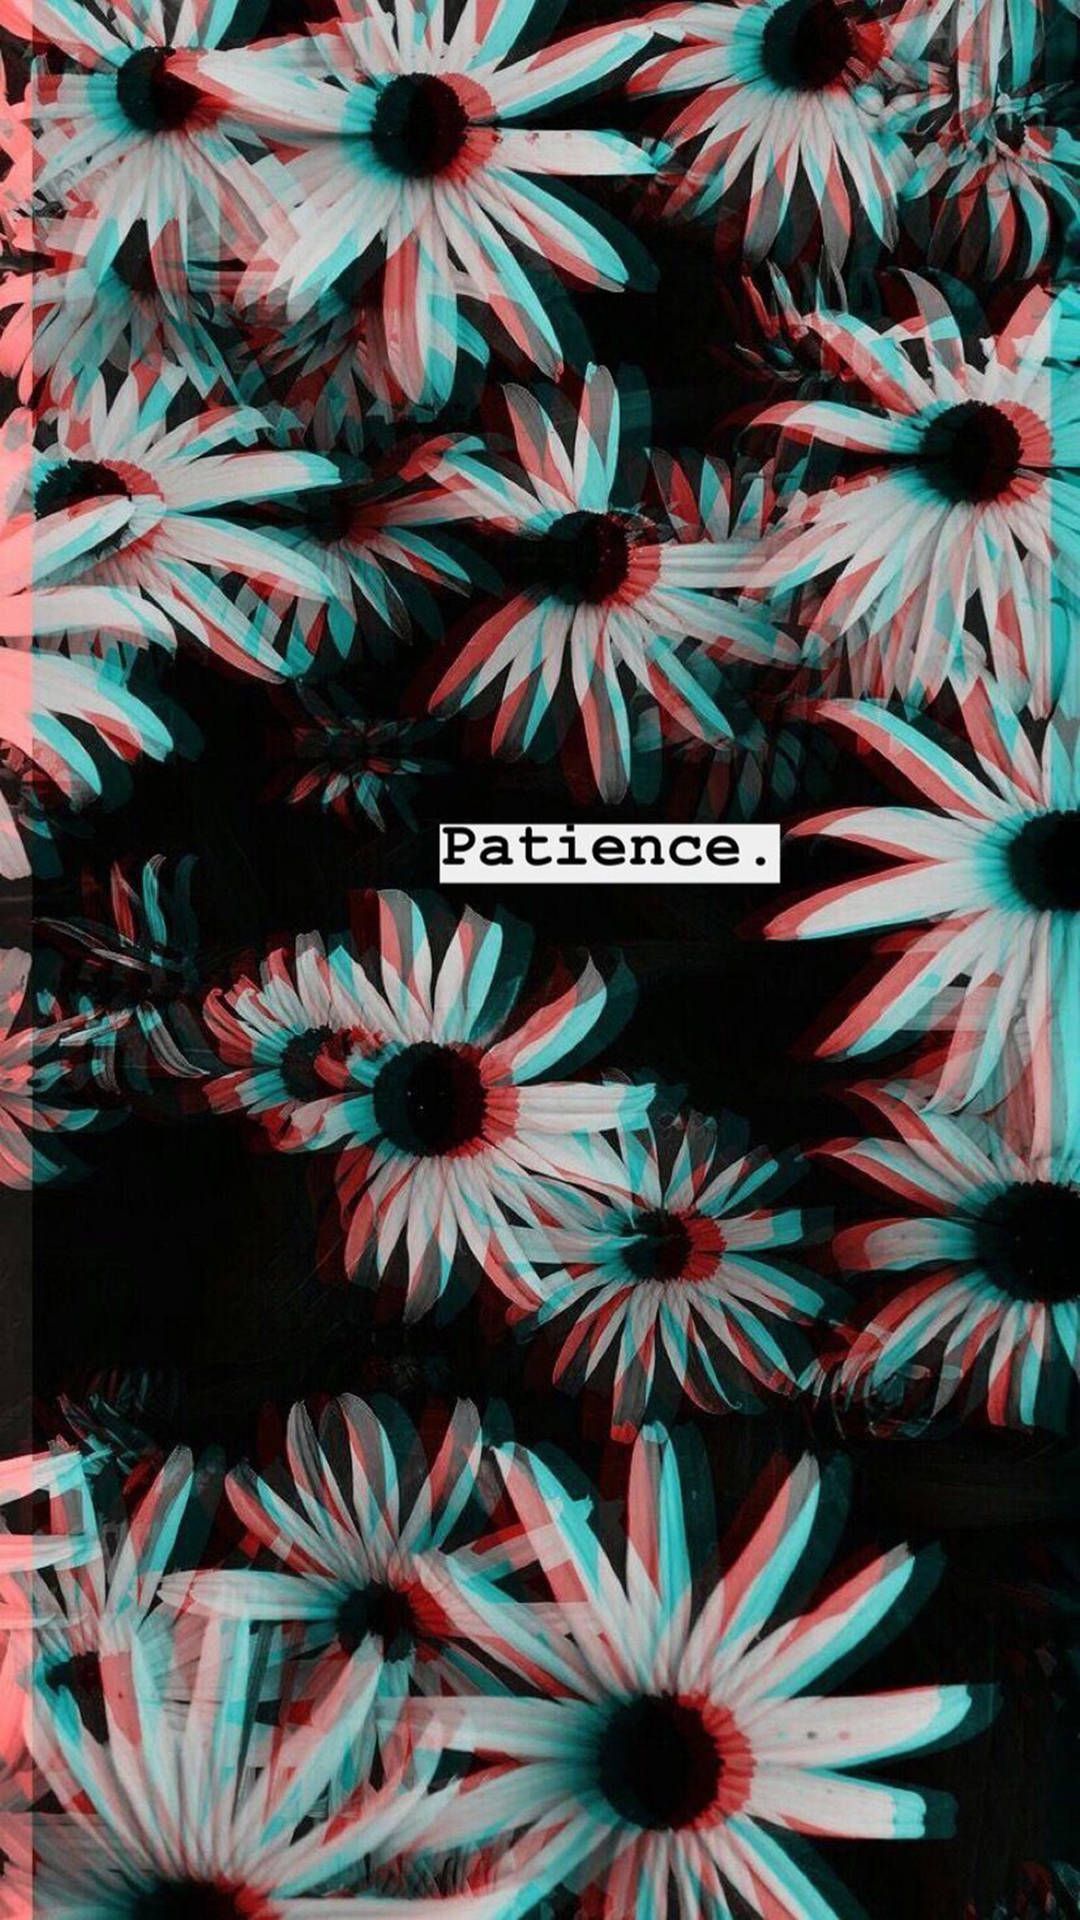 Aesthetic flower wallpaper for phone with the word patience. - Black glitch, glitch, trippy